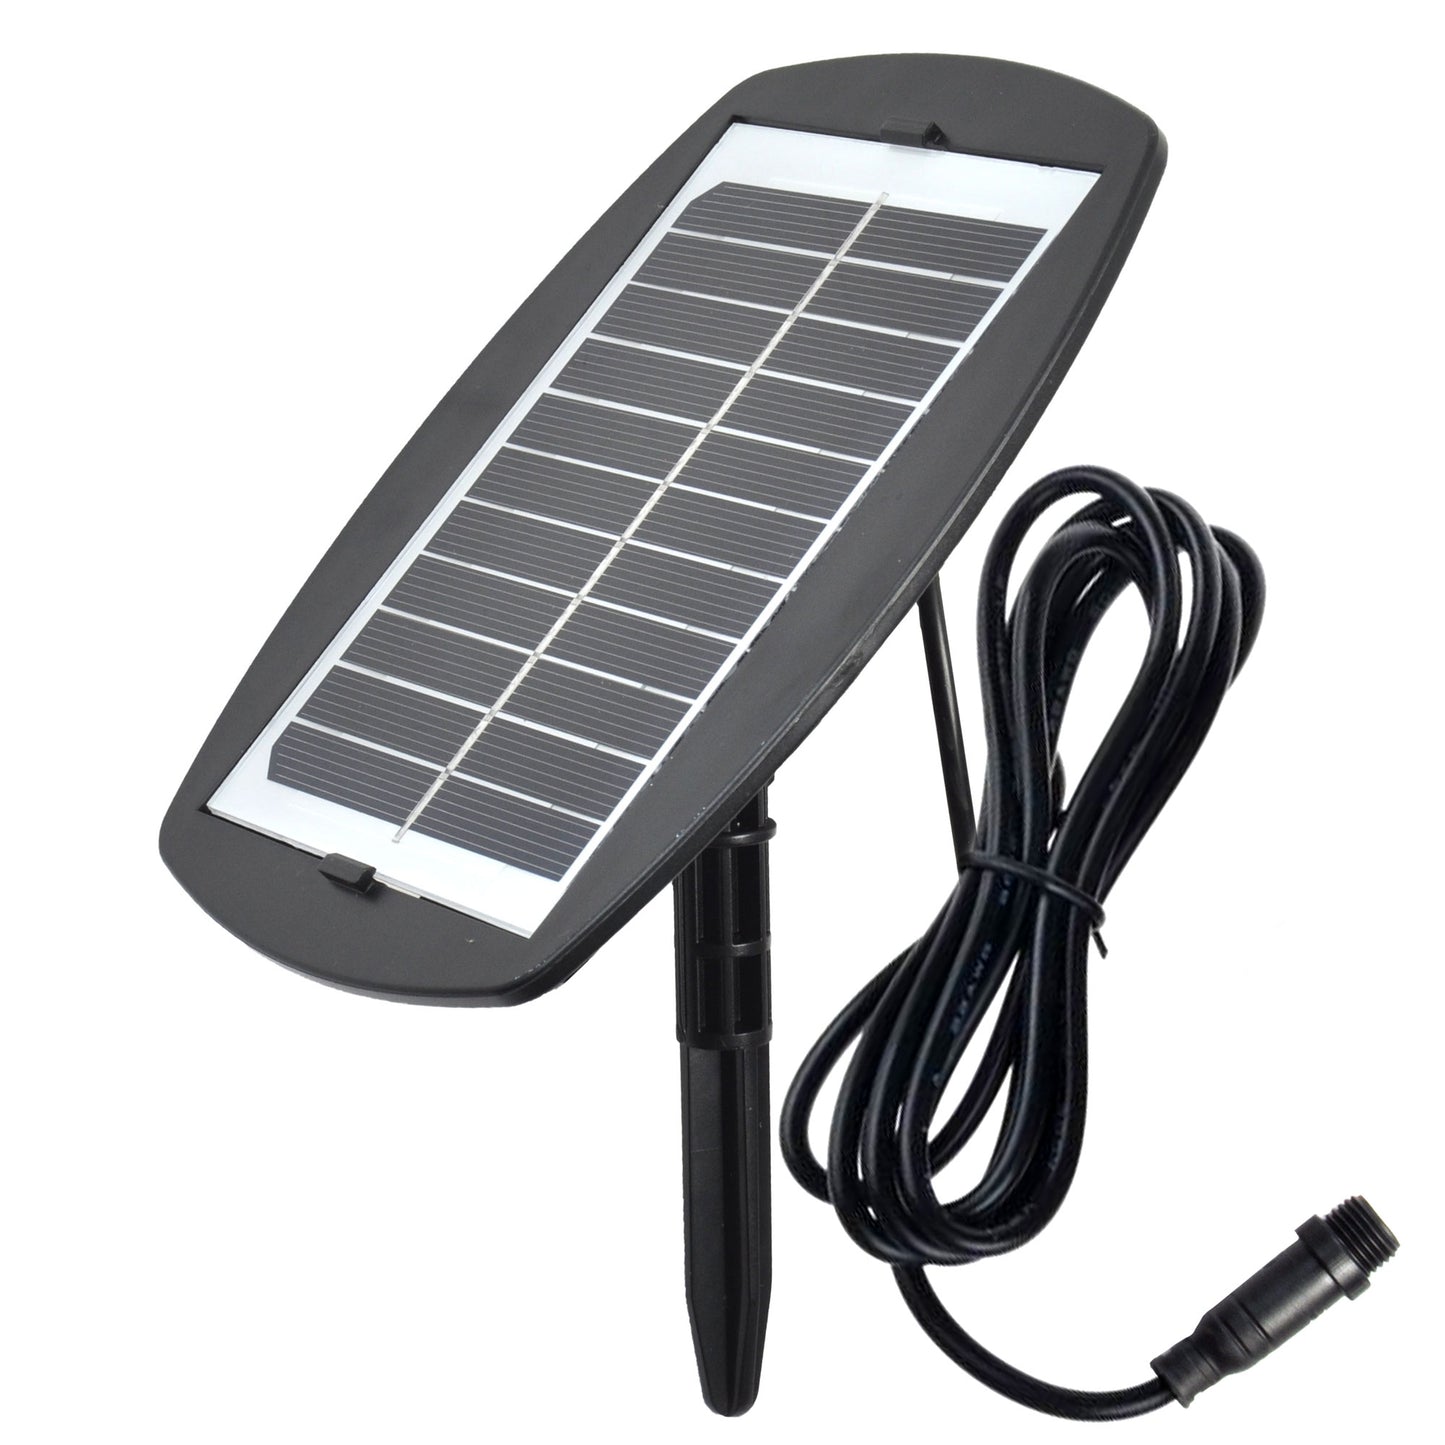 Solar Panel Attachment for Instant Fountains